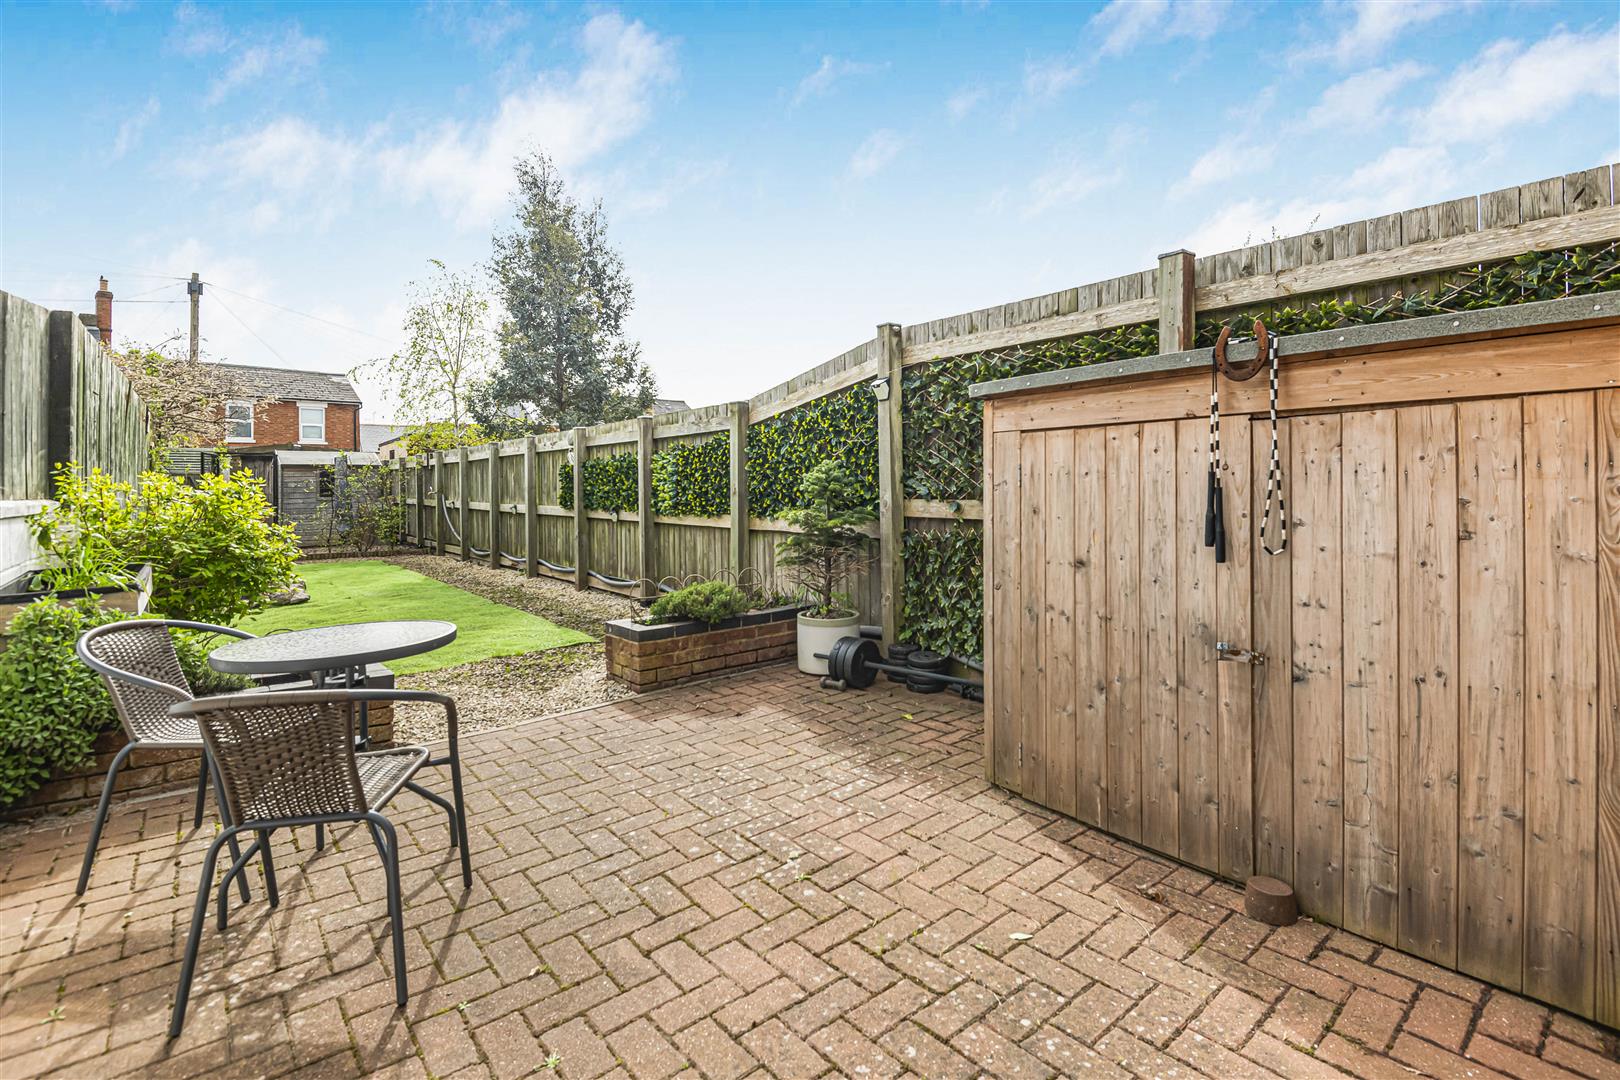 Coldicutt Street Caversham house for sale in Reading